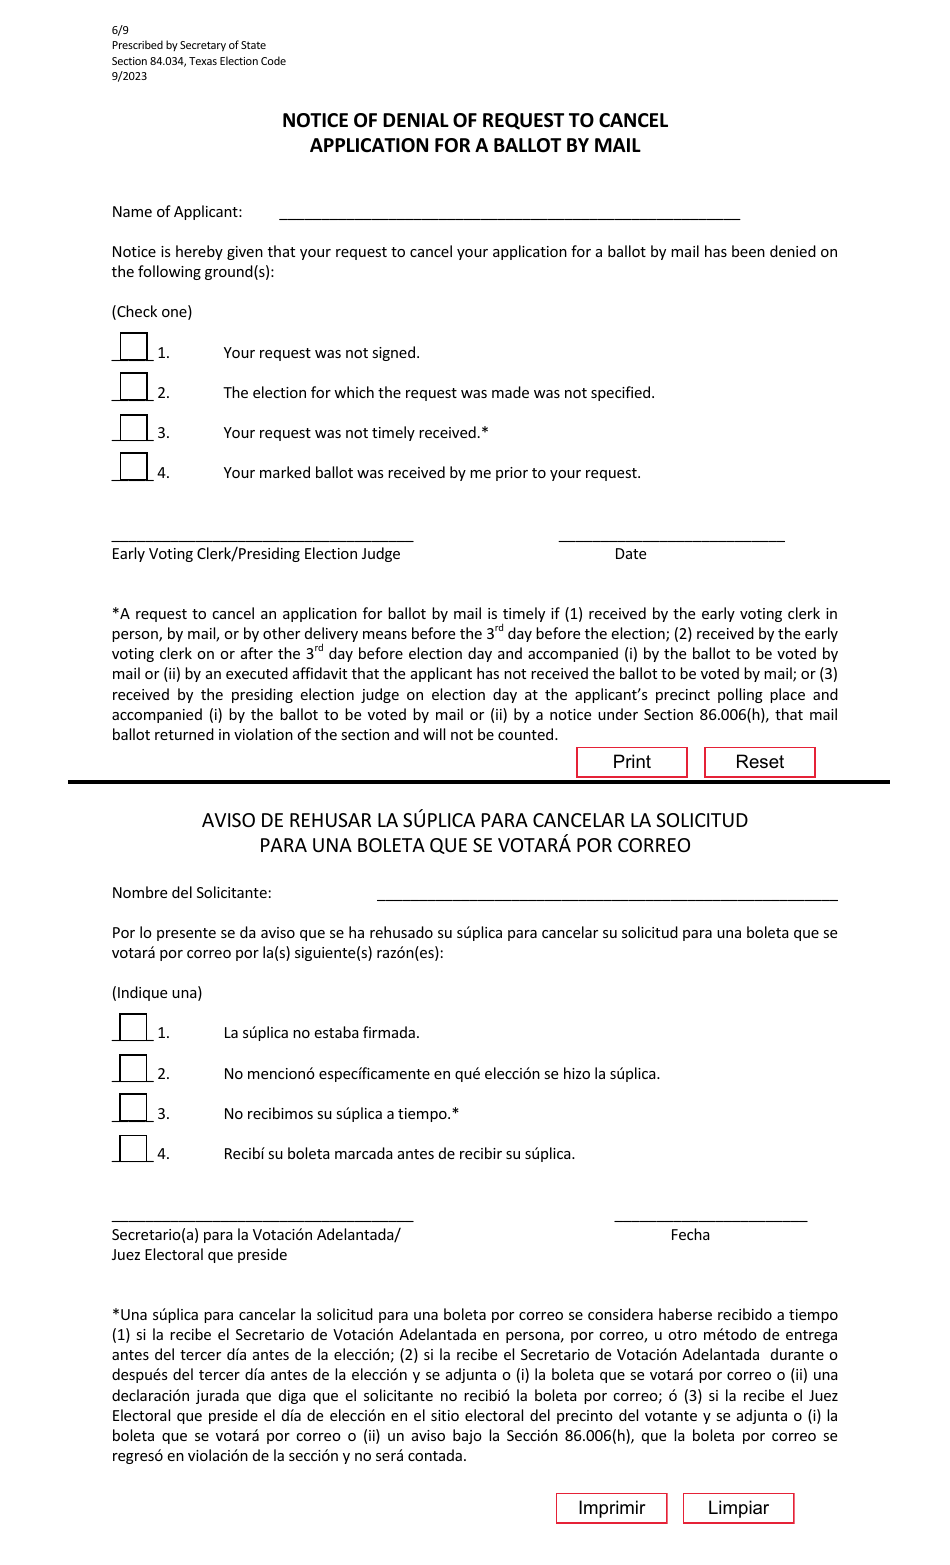 Form 6-9 Notice of Denial of Request to Cancel Application for a Ballot by Mail - Texas (English / Spanish), Page 1